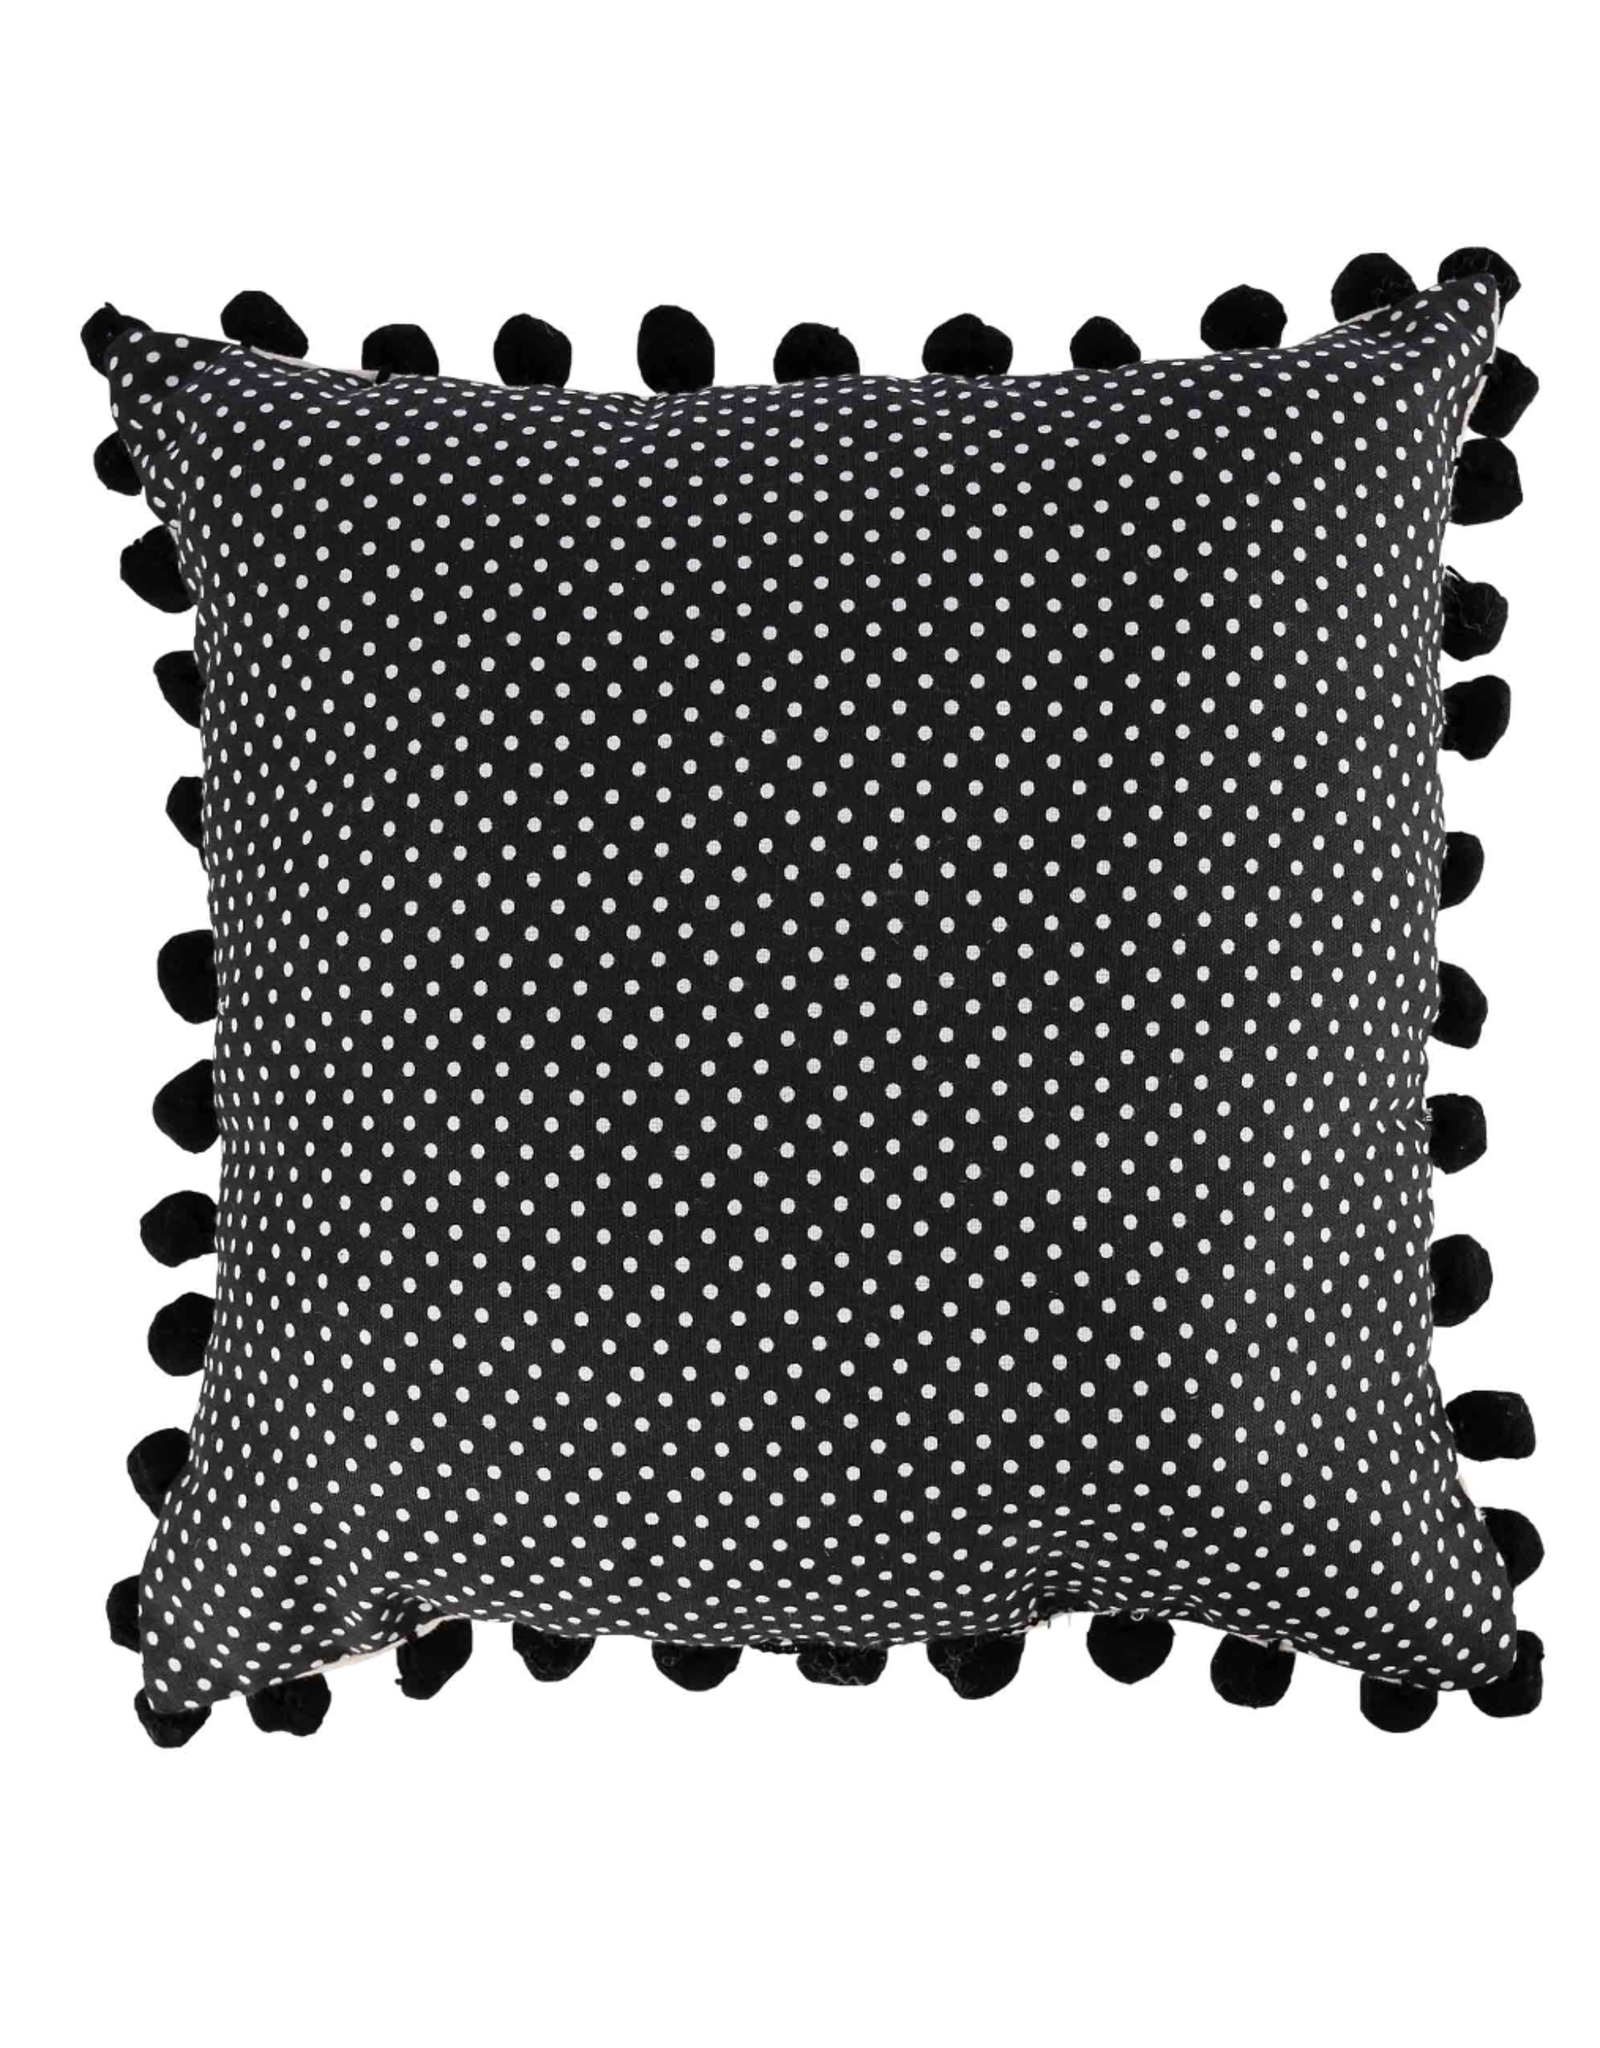 Glory Haus Trick or Treat Boo Pillow